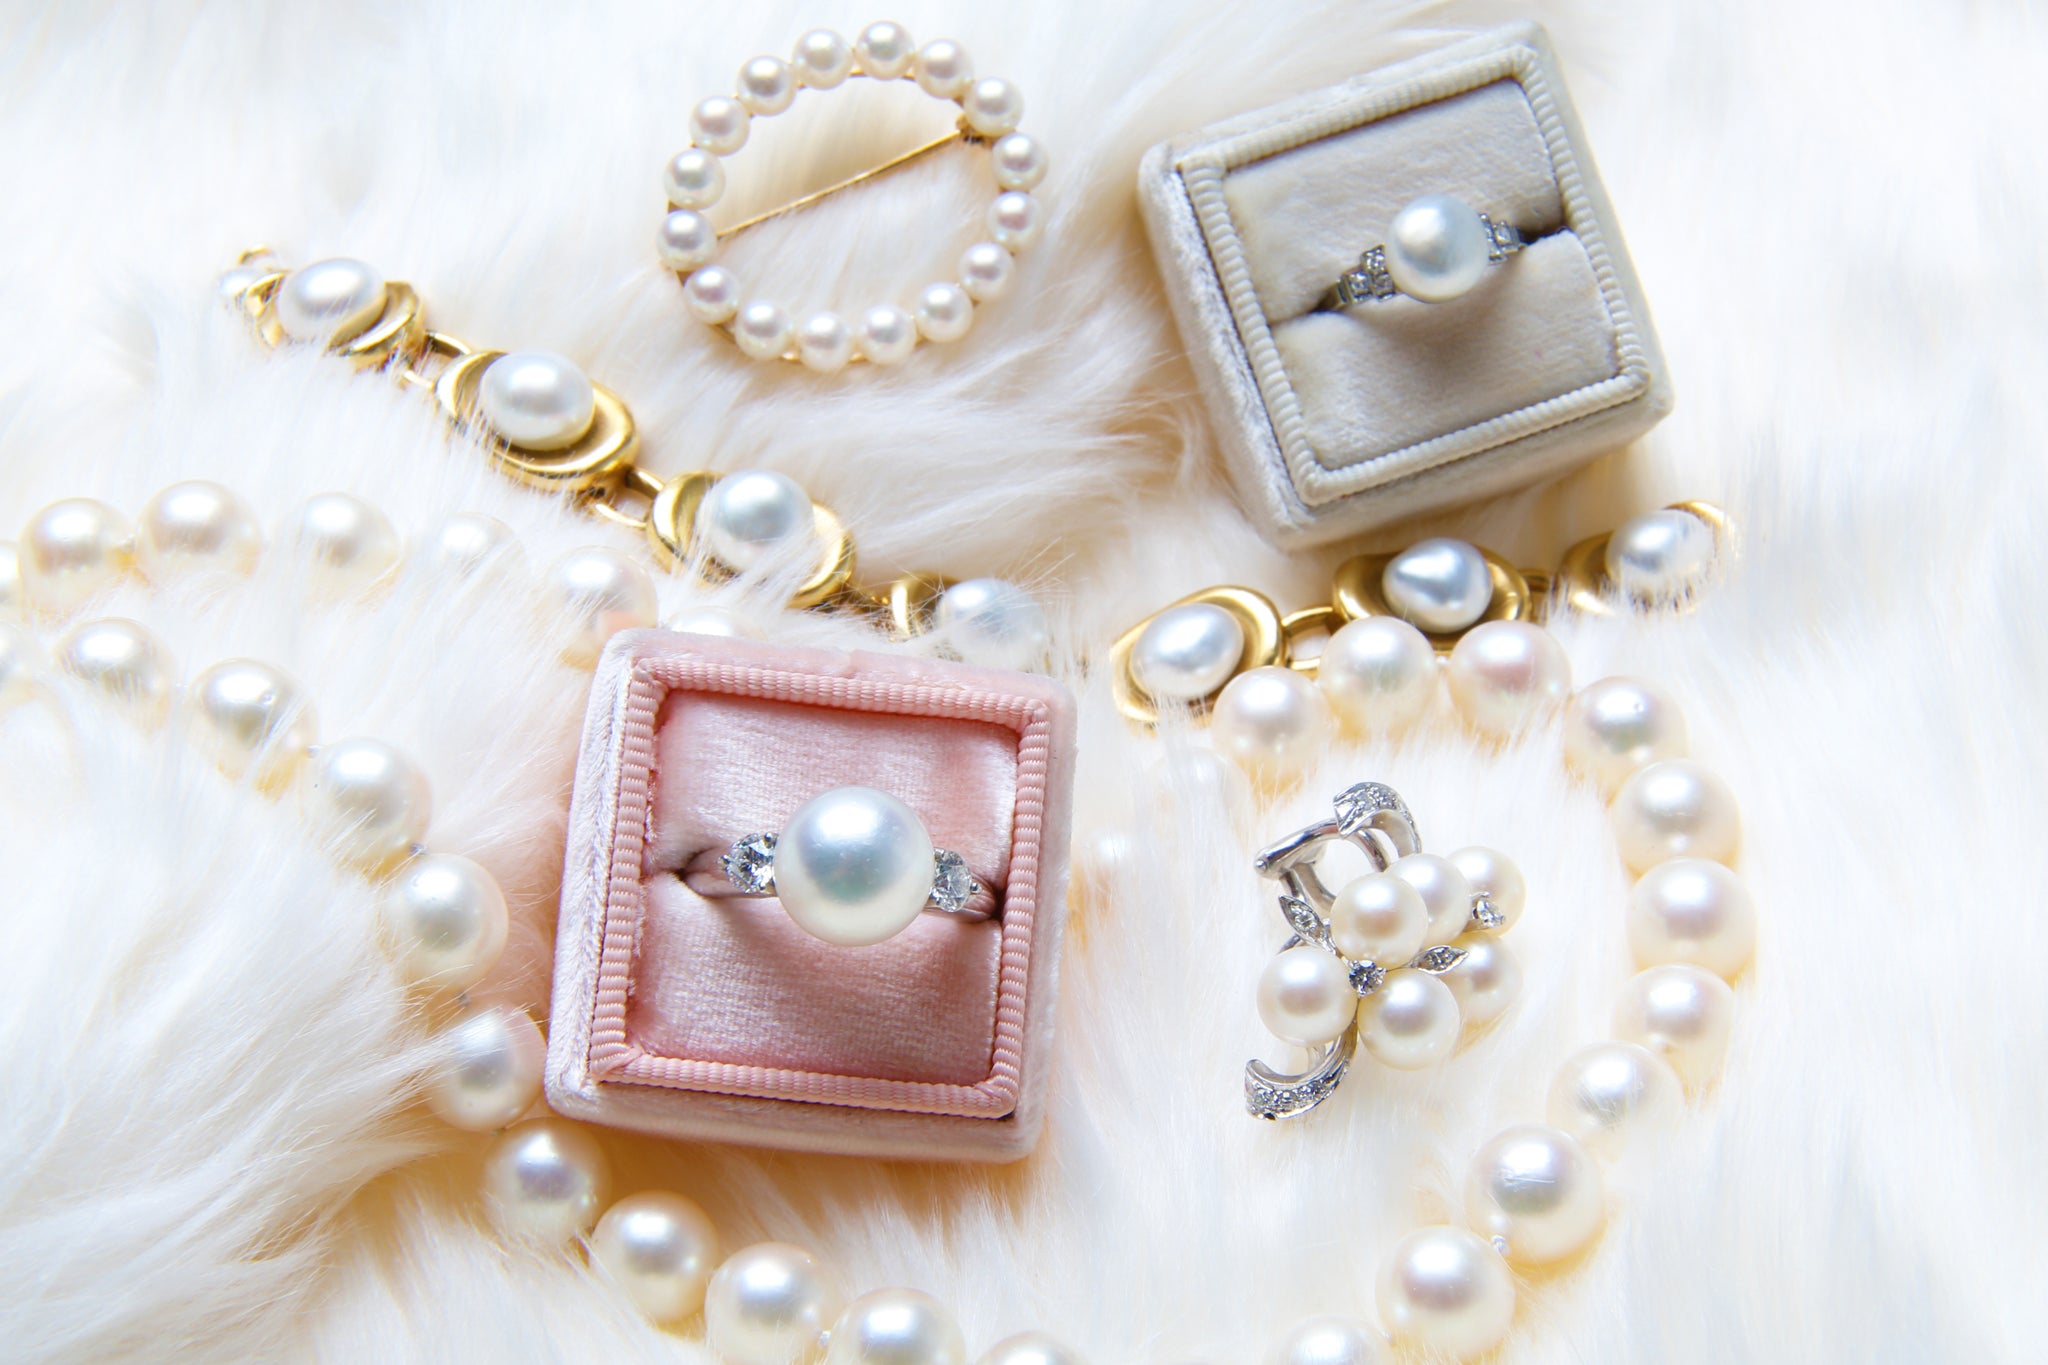 Vintage Pearl Engagement Rings and Pearl Jewelry from Trumpet & Horn